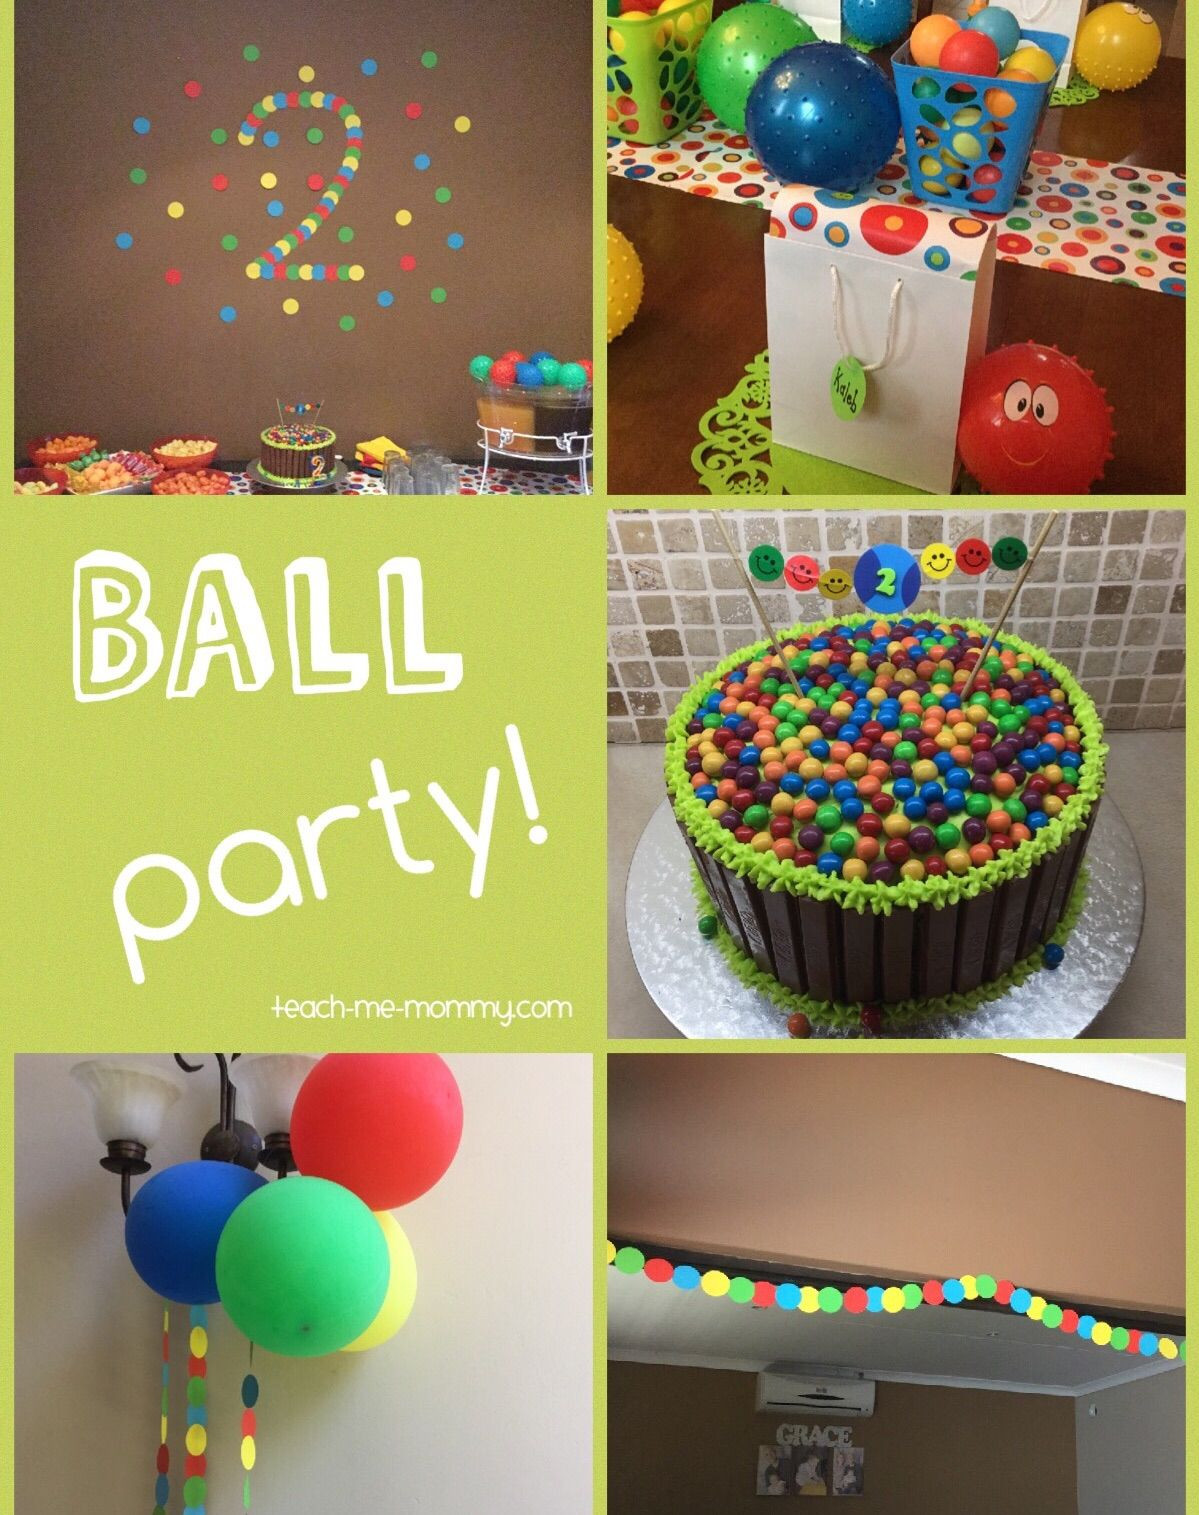 Two Year Old Birthday Party
 Ball Themed Party for a 2 Year Old Teach Me Mommy